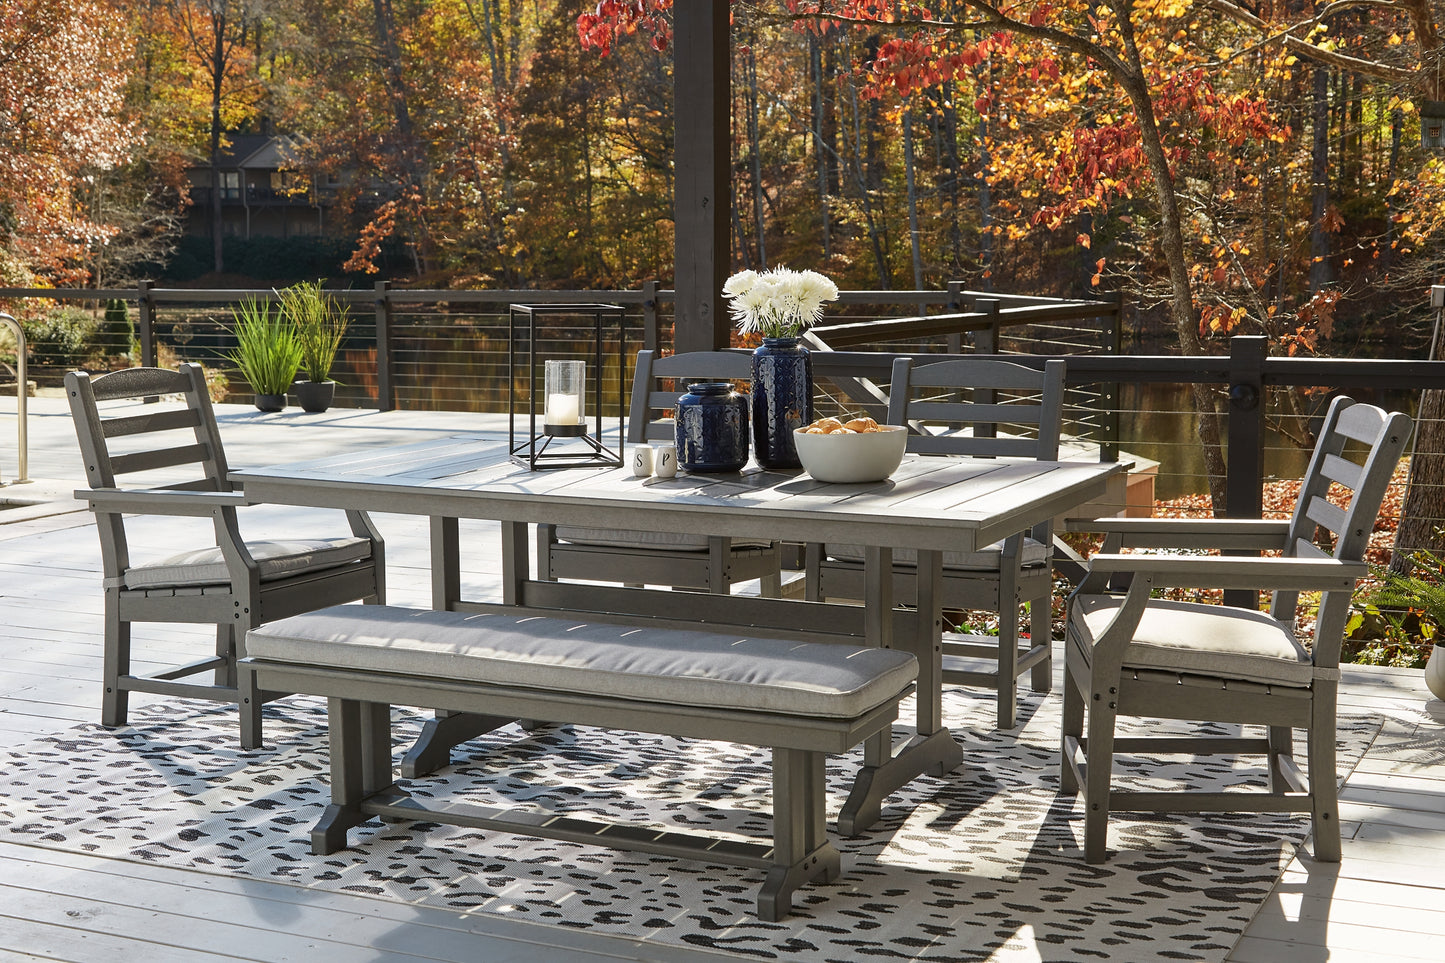 Visola Outdoor Dining Table and 4 Chairs and Bench